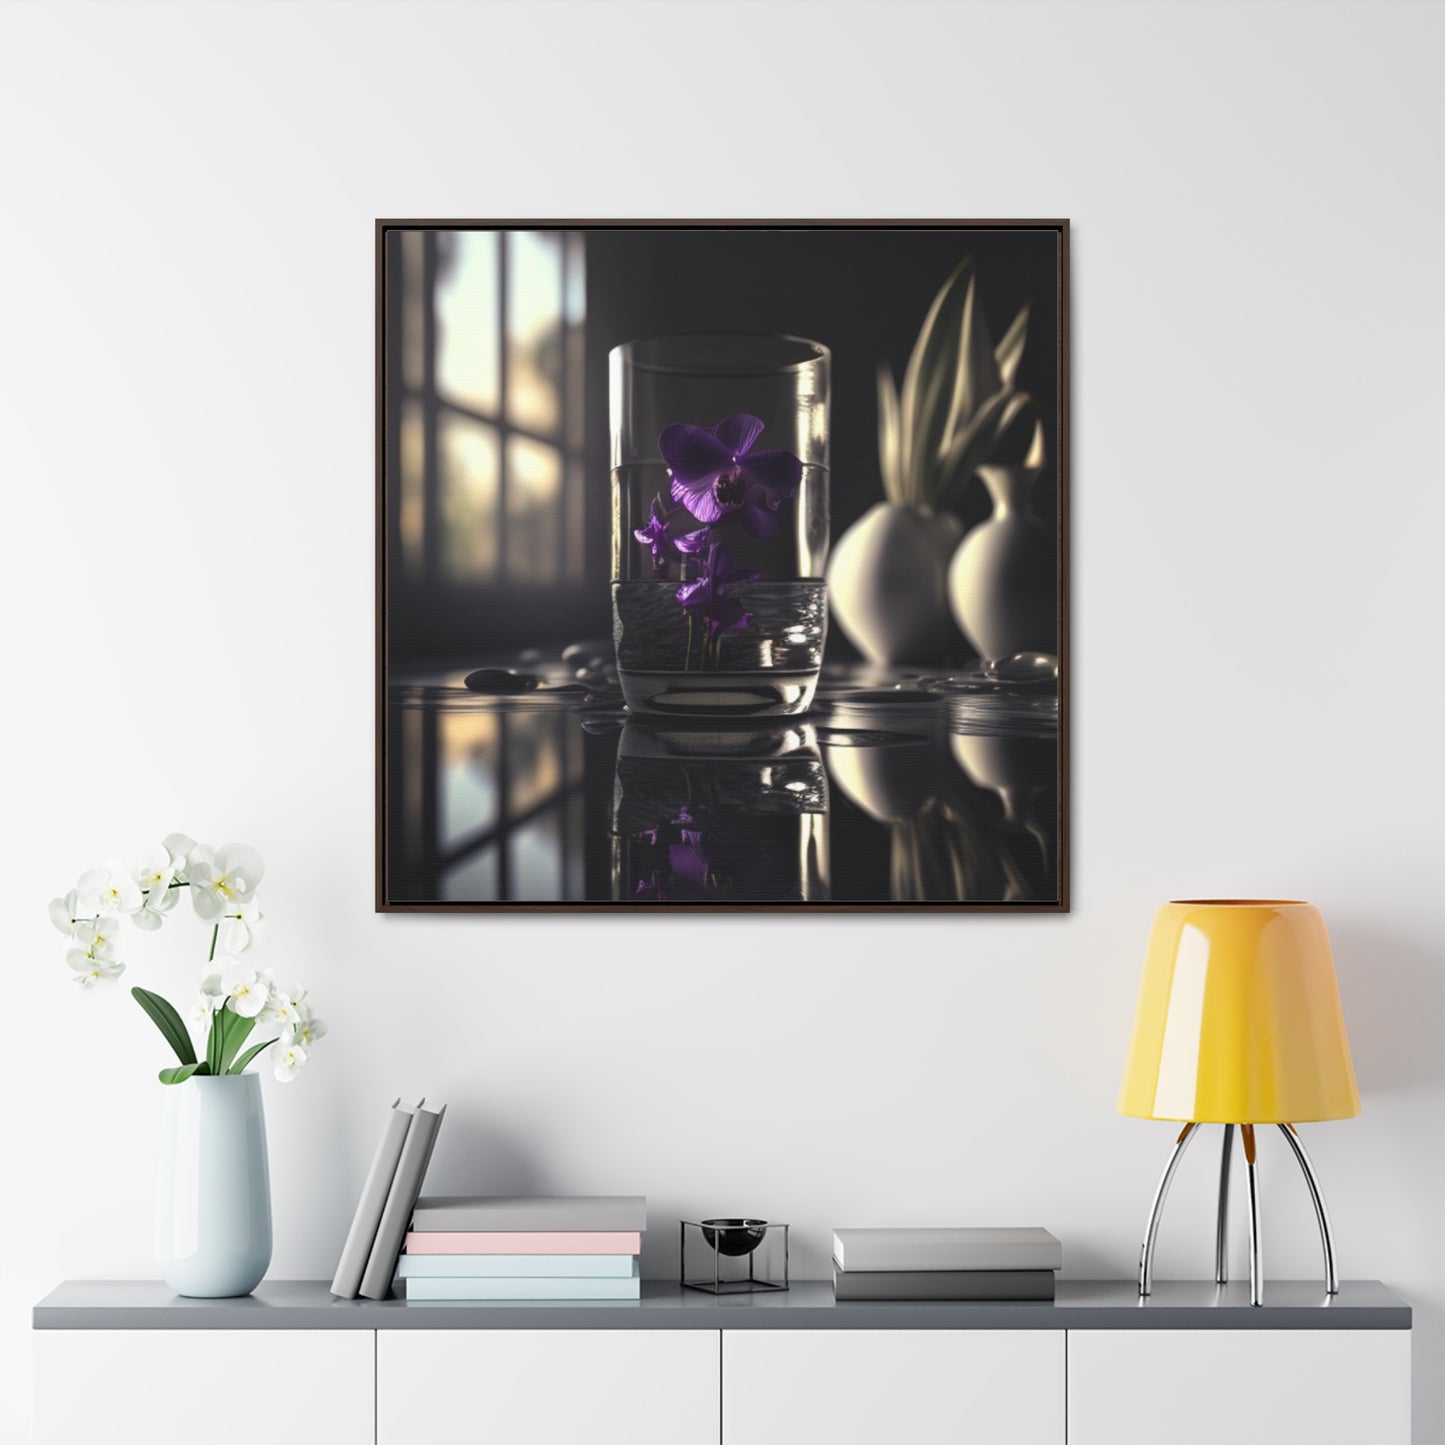 Gallery Canvas Wraps, Square Frame Purple Orchid Glass vase 4